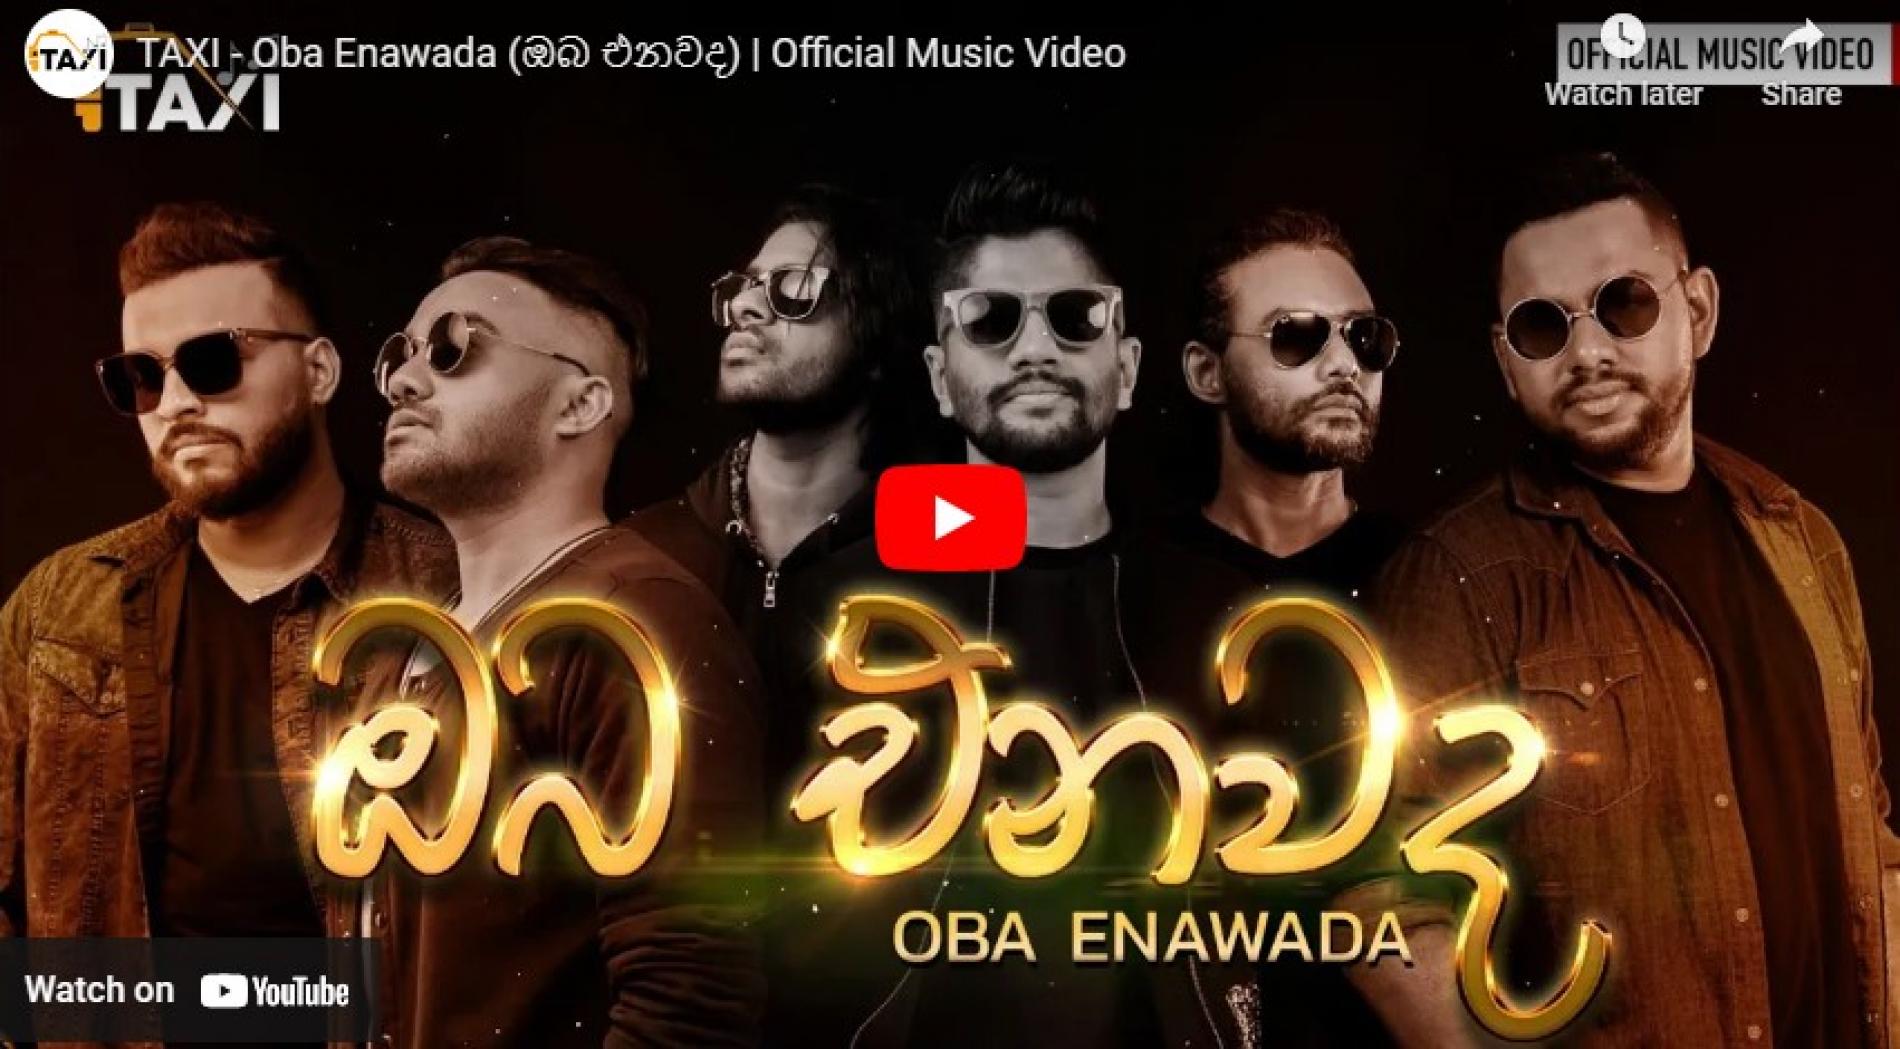 New Music : TAXI – Oba Enawada (ඔබ එනවද) | Official Music Video